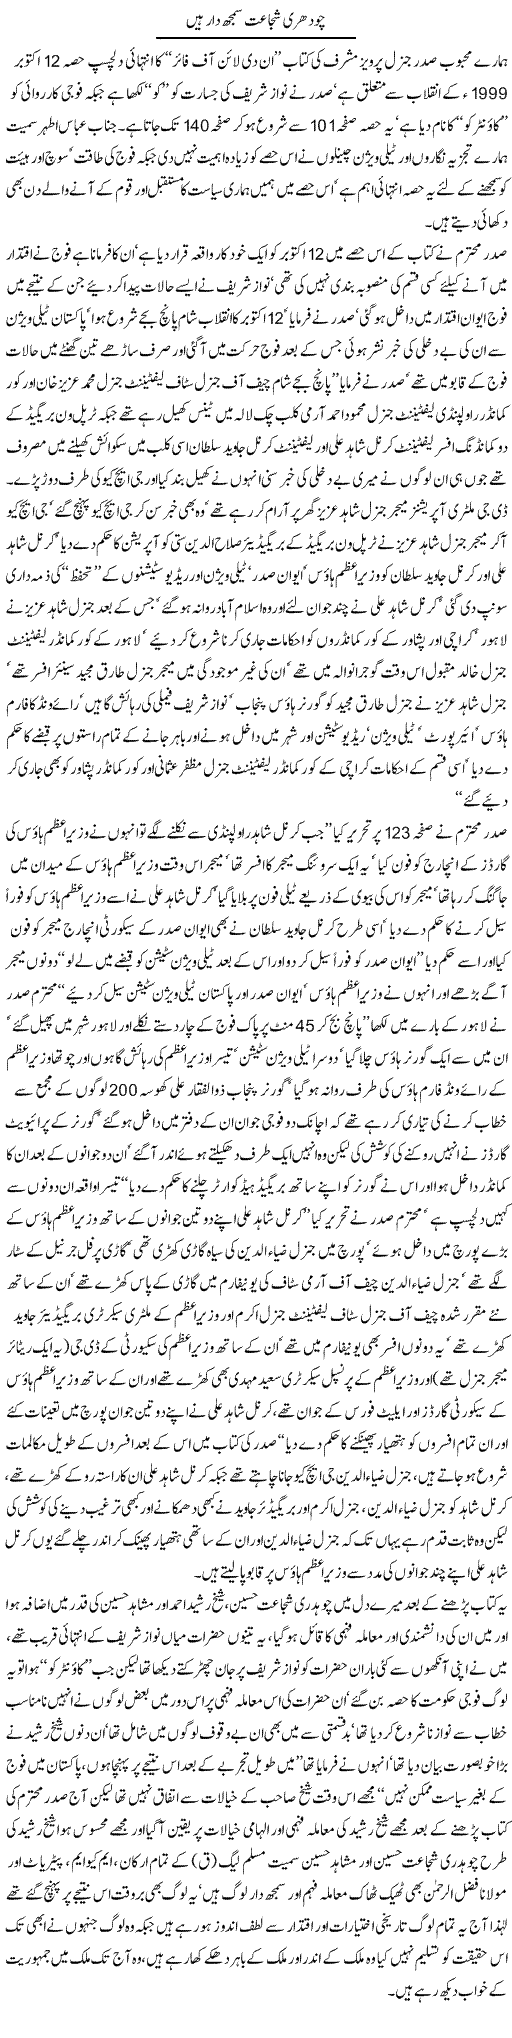 Chaudhry Shujaat samajdaar hen - Javed Chaudhry 6 oct 2006 (about Marshal law)